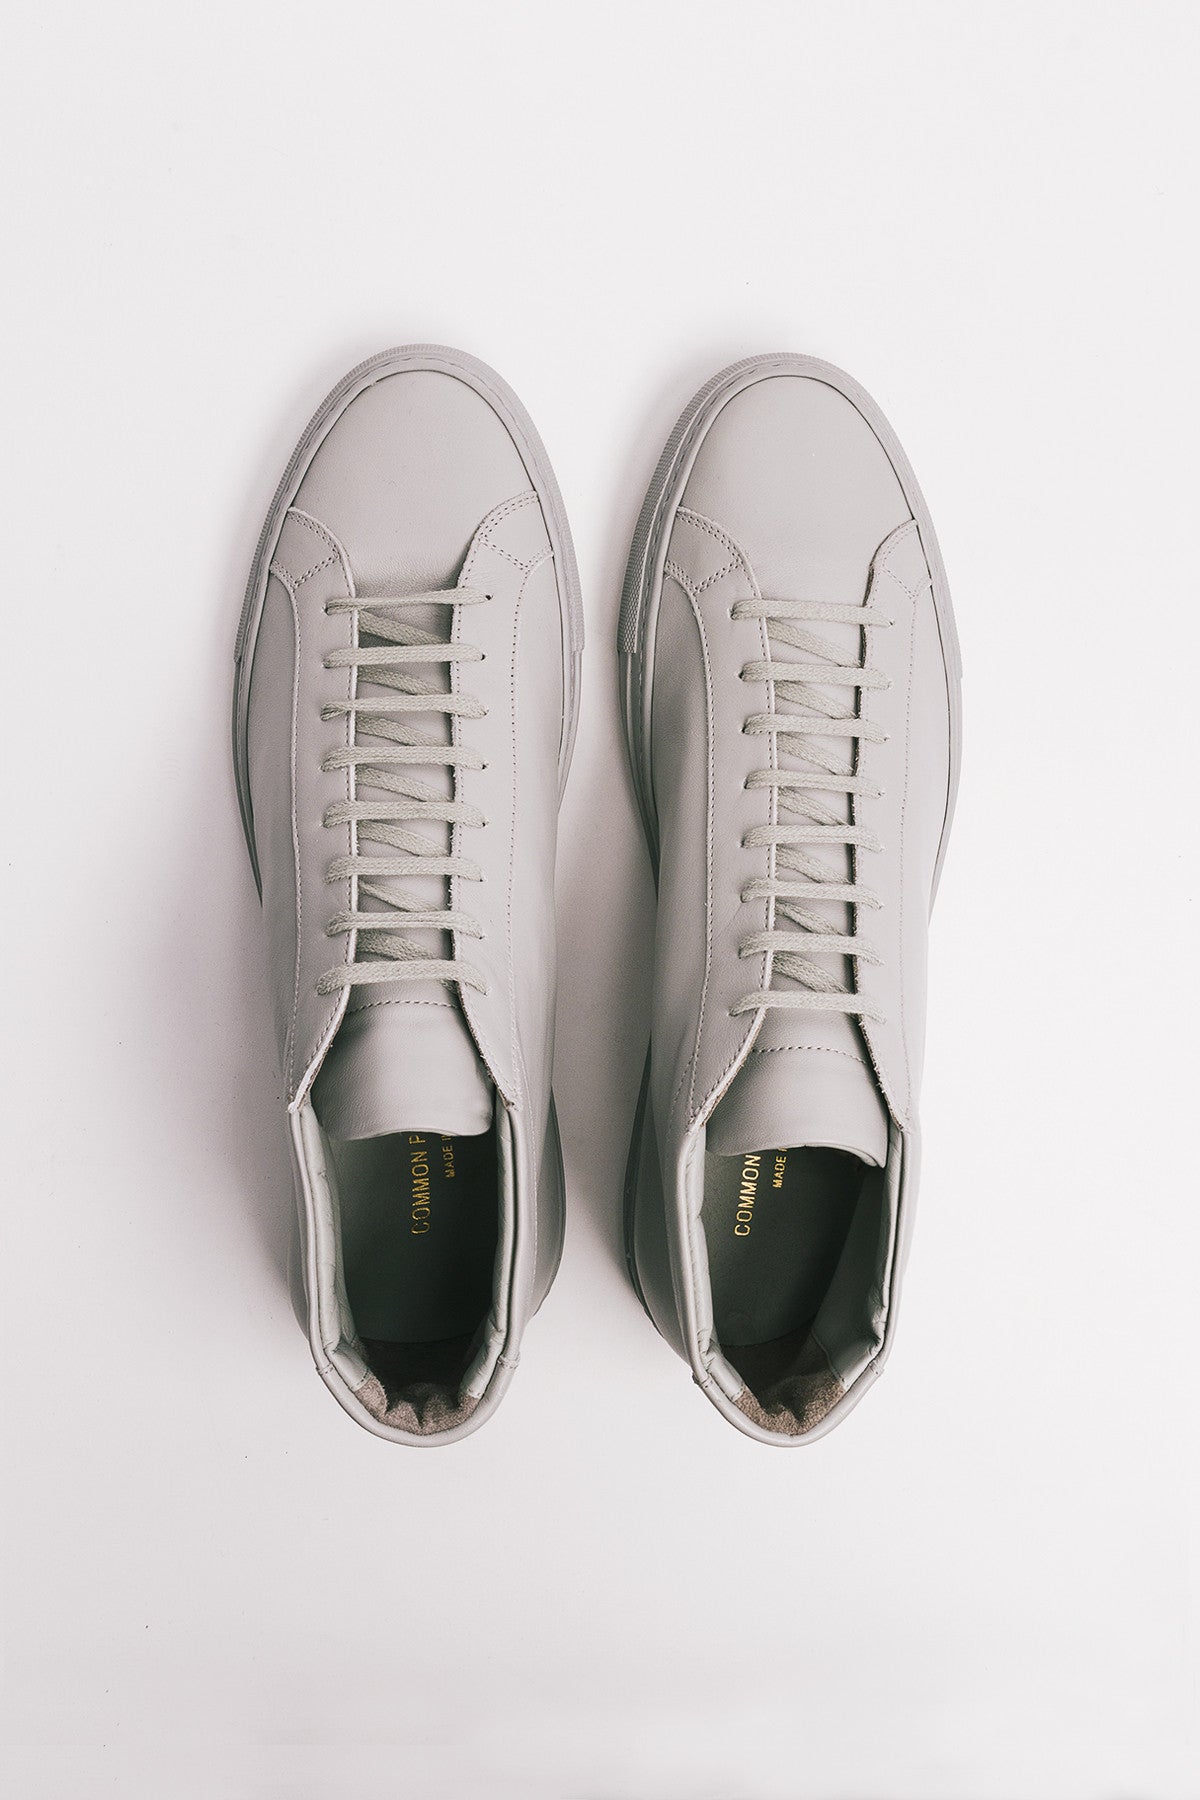 Common Projects - Nomad Webshop